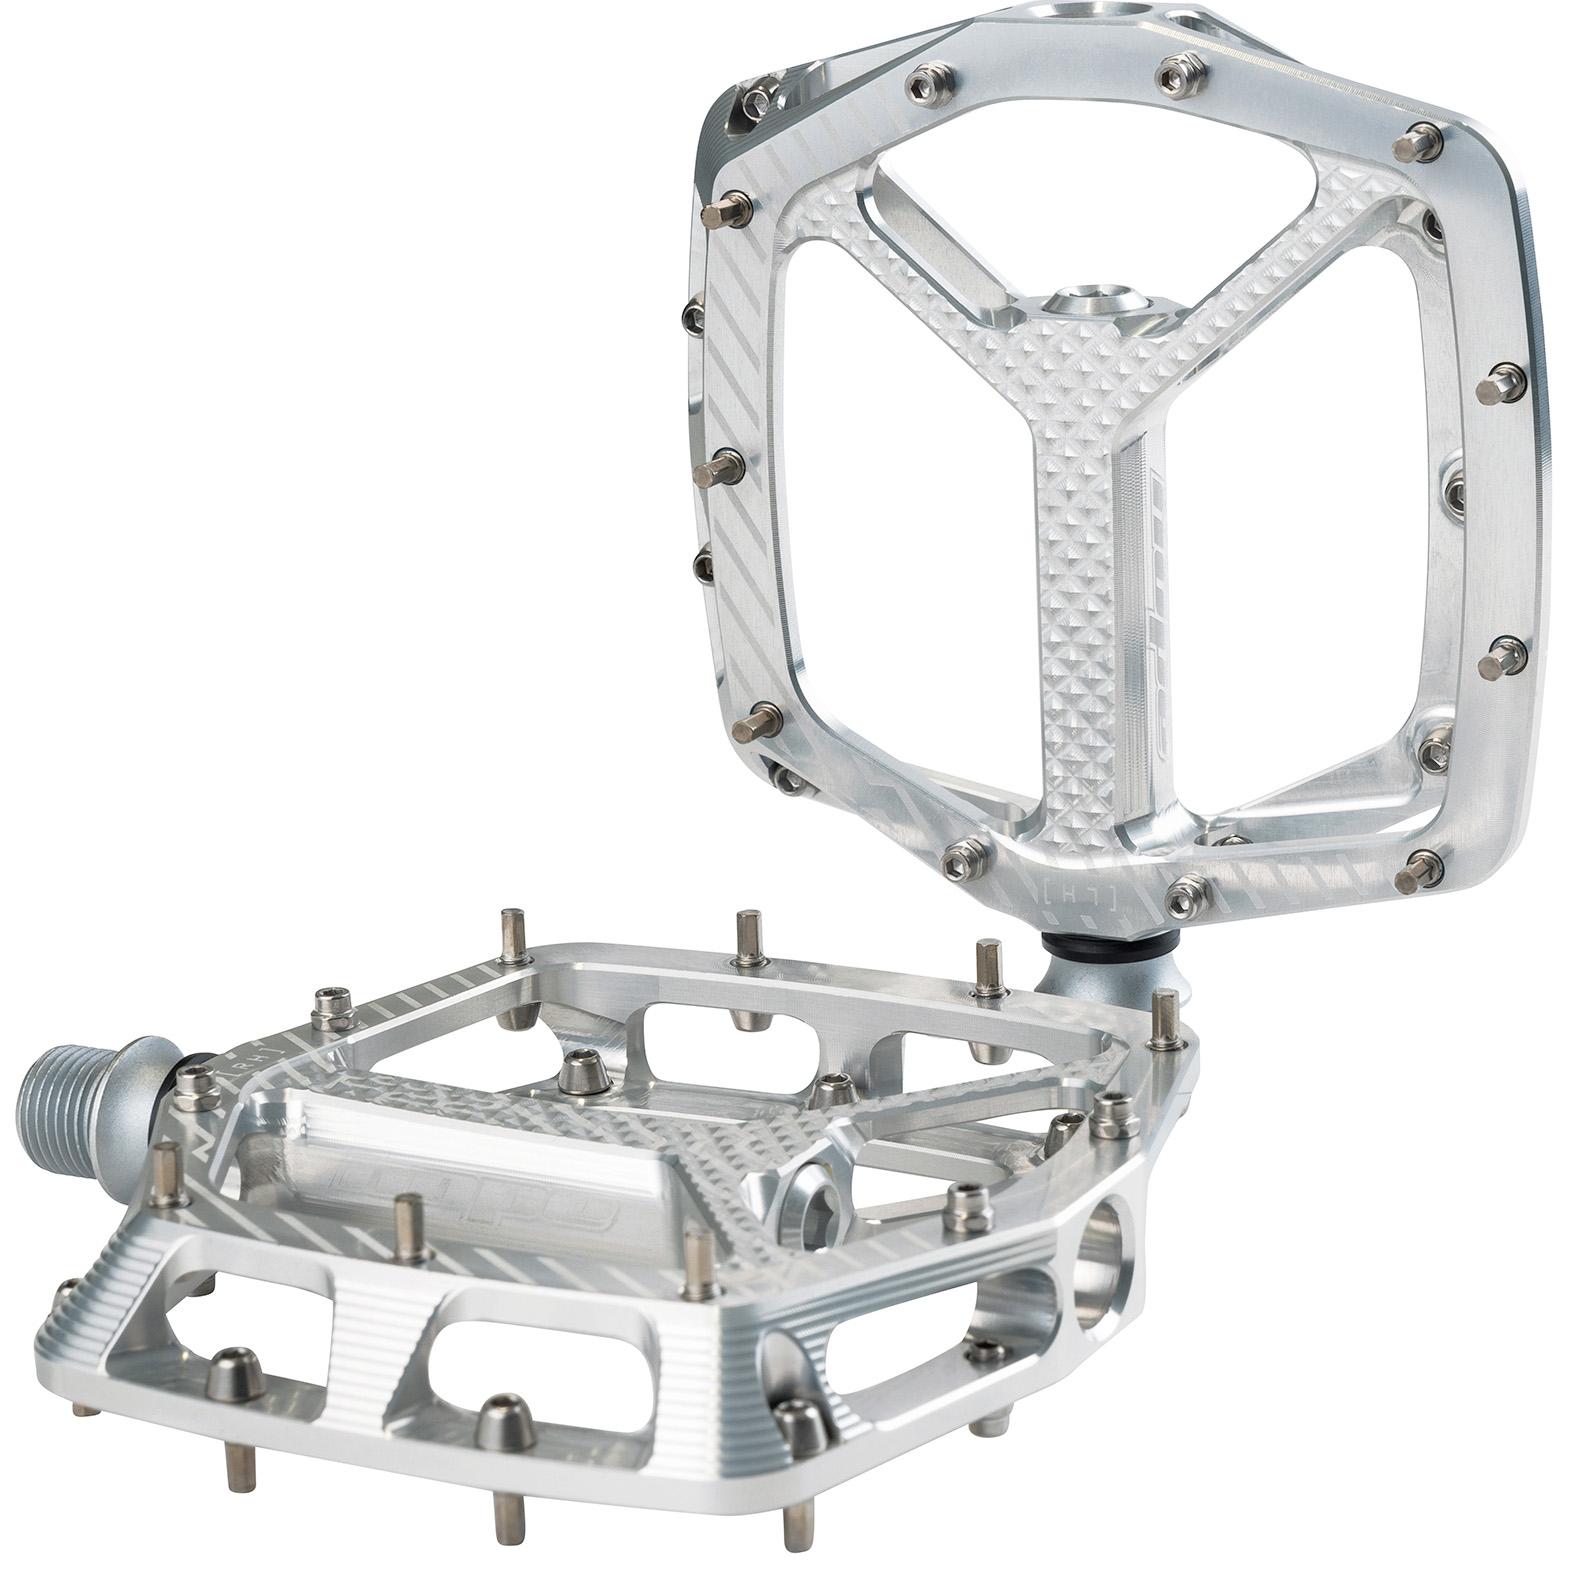 Hope F22 Flat Pedals - Silver